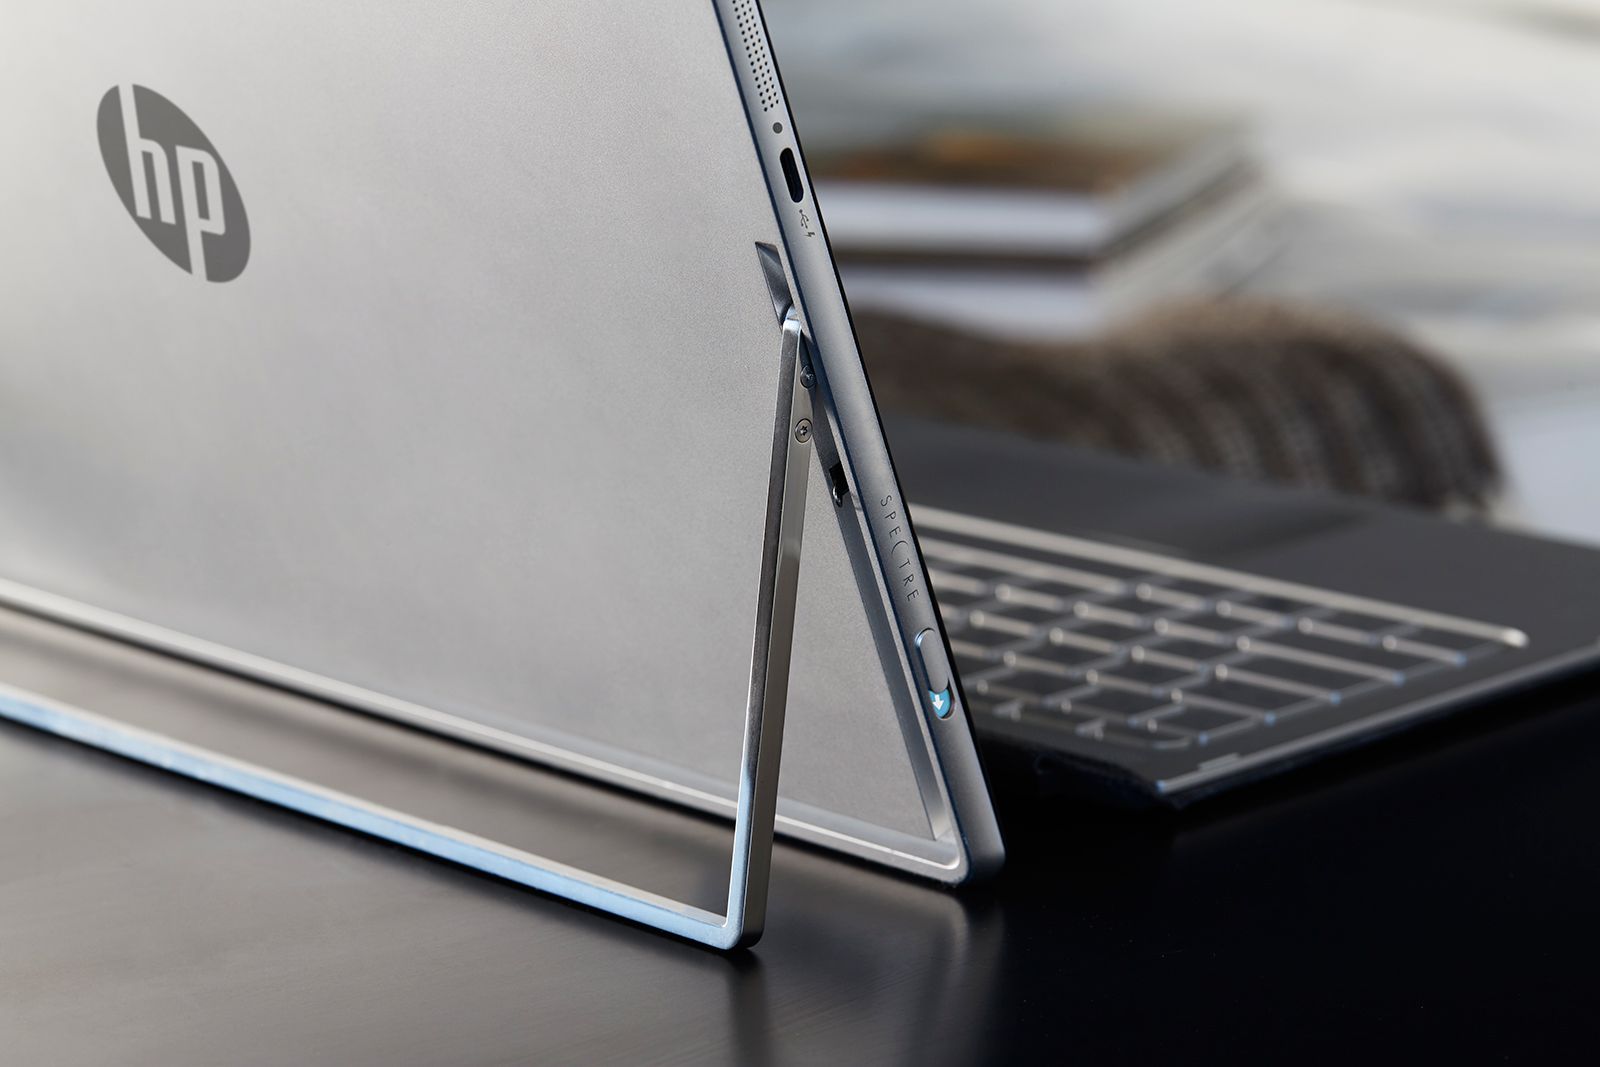 spectre x2 is hp s thinnest 2 in 1 ever and it s powerful too image 1